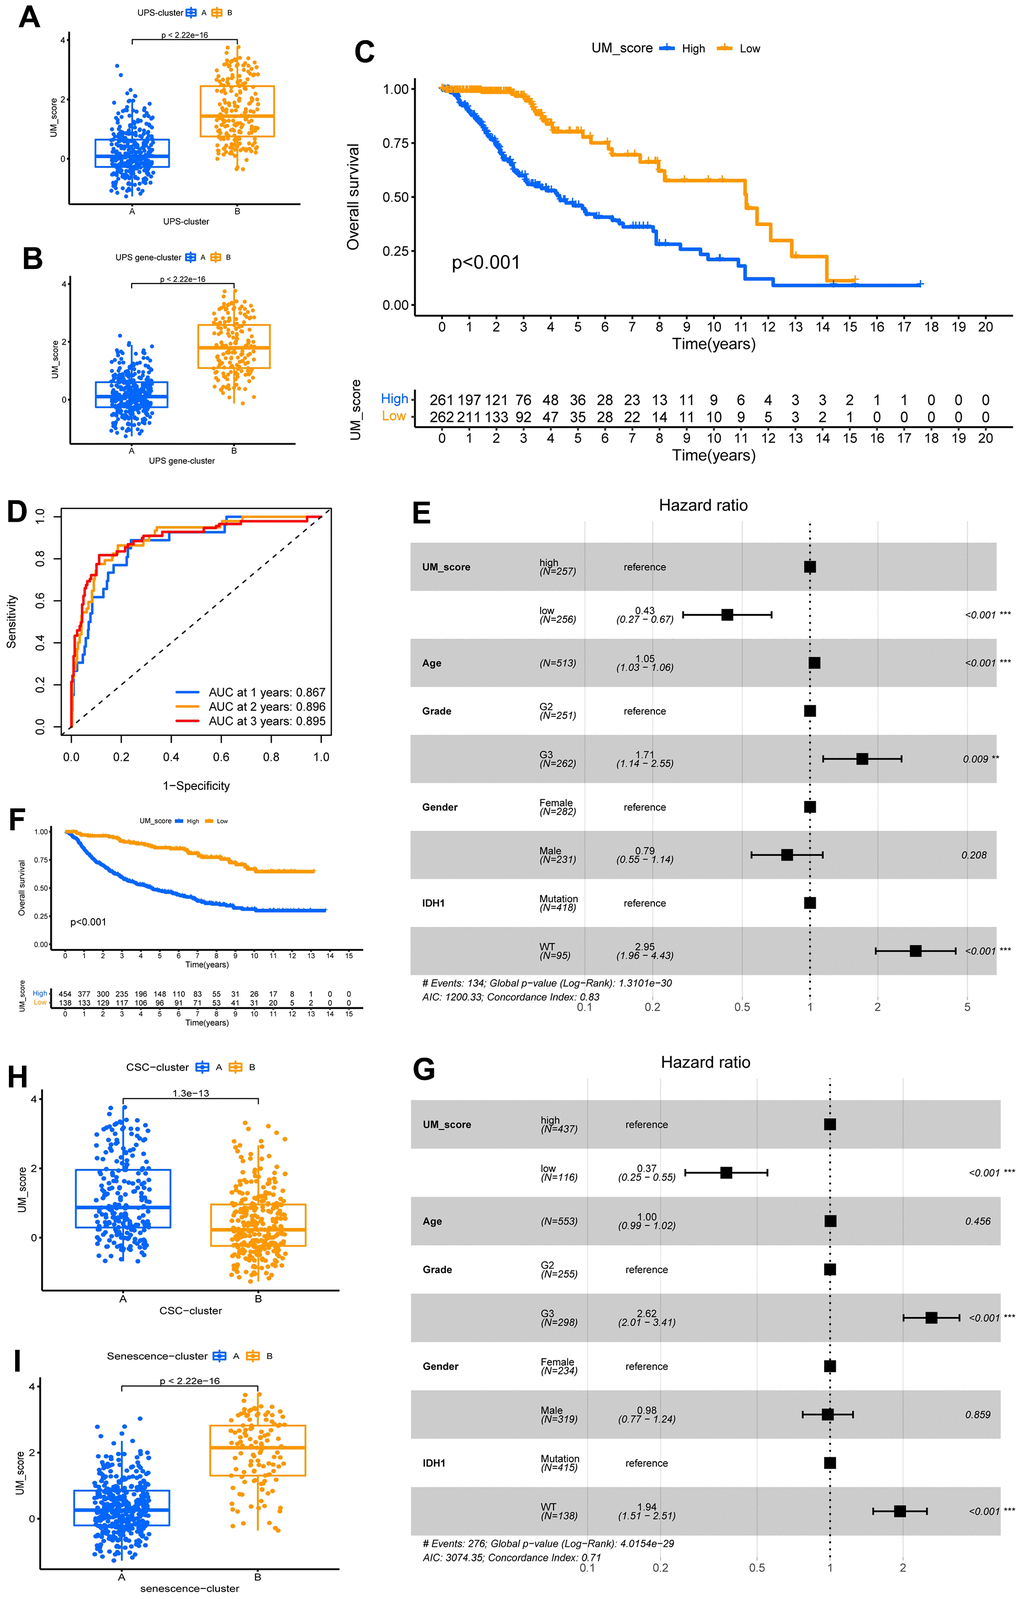 Construction of ubiquitination modification characteristic signature. (A, B) Distinction in the UM-score between ubiquitination modification modes and gene clusters in TCGA-LGG cohorts. (C) Survival analyses for the UM-score groups based on 523 patients with low-grade glioma from TCGA-LGG cohort. (D) The forecast value of UM-score in patients among the TCGA-LGG cohorts (AUC: 0.867, 0.896, and 0.895; 1, 2, and 3-years overall survival). (E) Multivariate Cox regression analysis, which included the factors of UM-score, Age, Grade, Gender, IDH1 status and patient outcomes in the TCGA-LGG cohort. (F) Survival analyses for the high- and low-UM-score groups based on 592 patients with low-grade glioma from CGGA-LGG cohort. (G) Multivariate Cox regression analysis, which included the factors of UM-score, Age, Grade, Gender, IDH1 status and patient outcomes in the CGGA-LGG cohort. (H, I) Distinction in the UM-score between CSC-clusters and Senescence-clusters in TCGA-LGG cohorts.